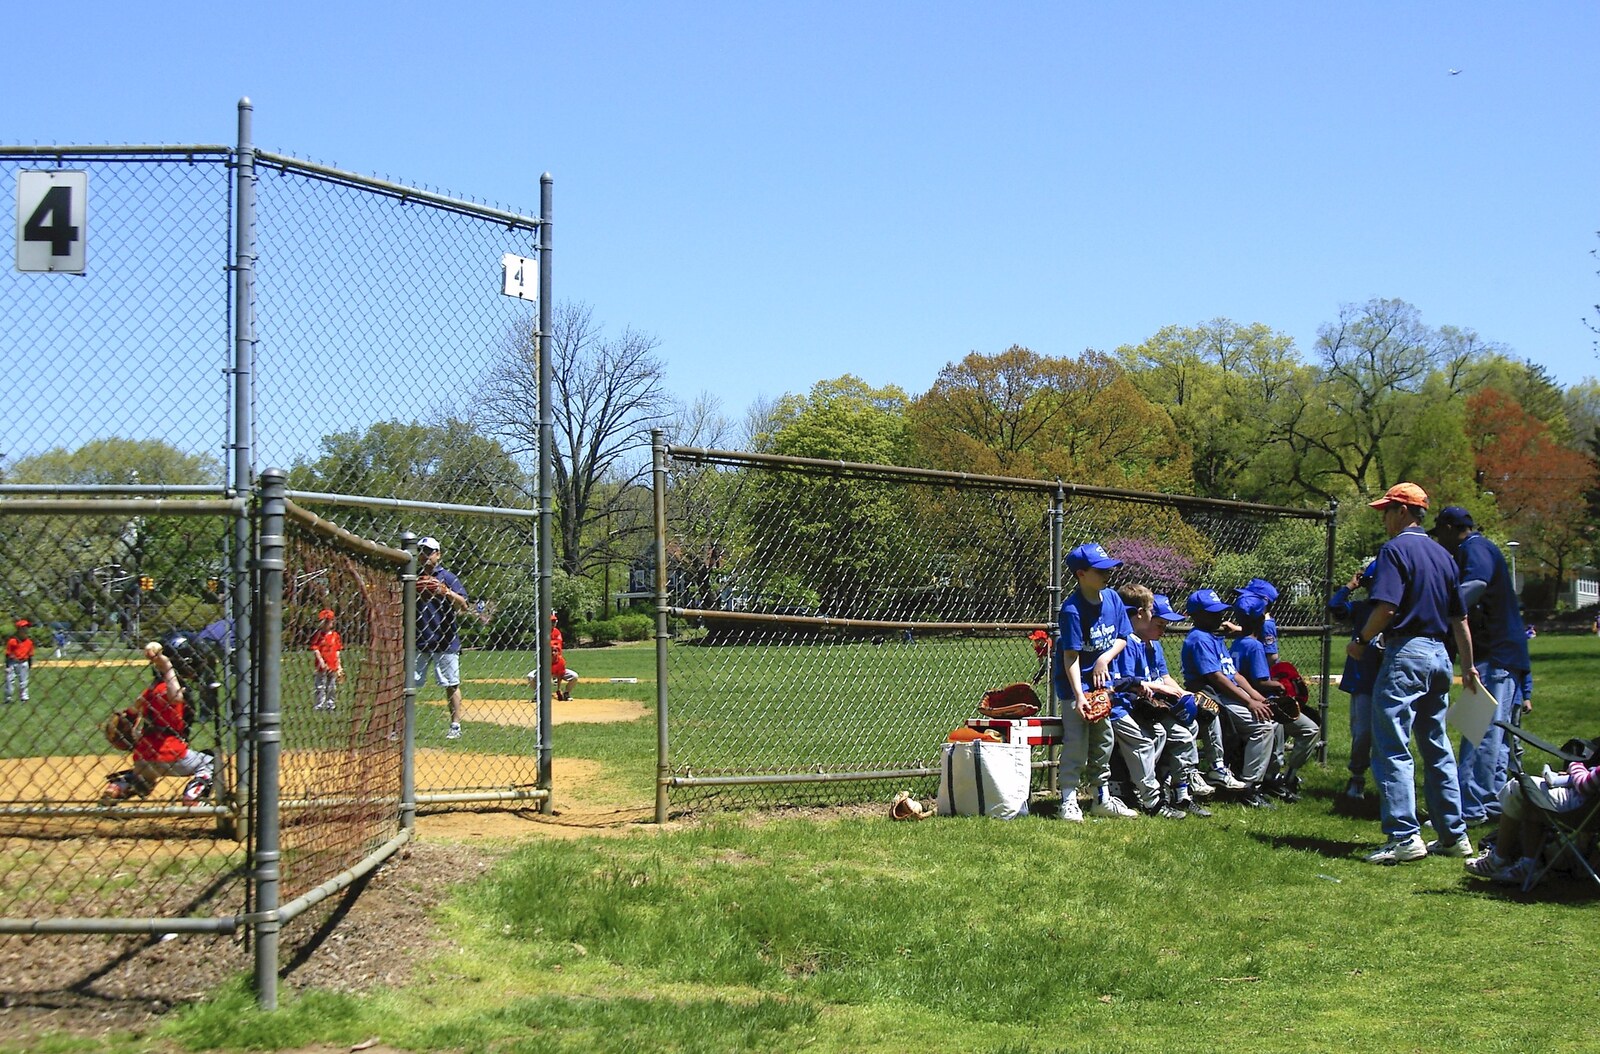 The baseball cage from Maplewood and Little-League Baseball, New Jersey - 29th April 2006